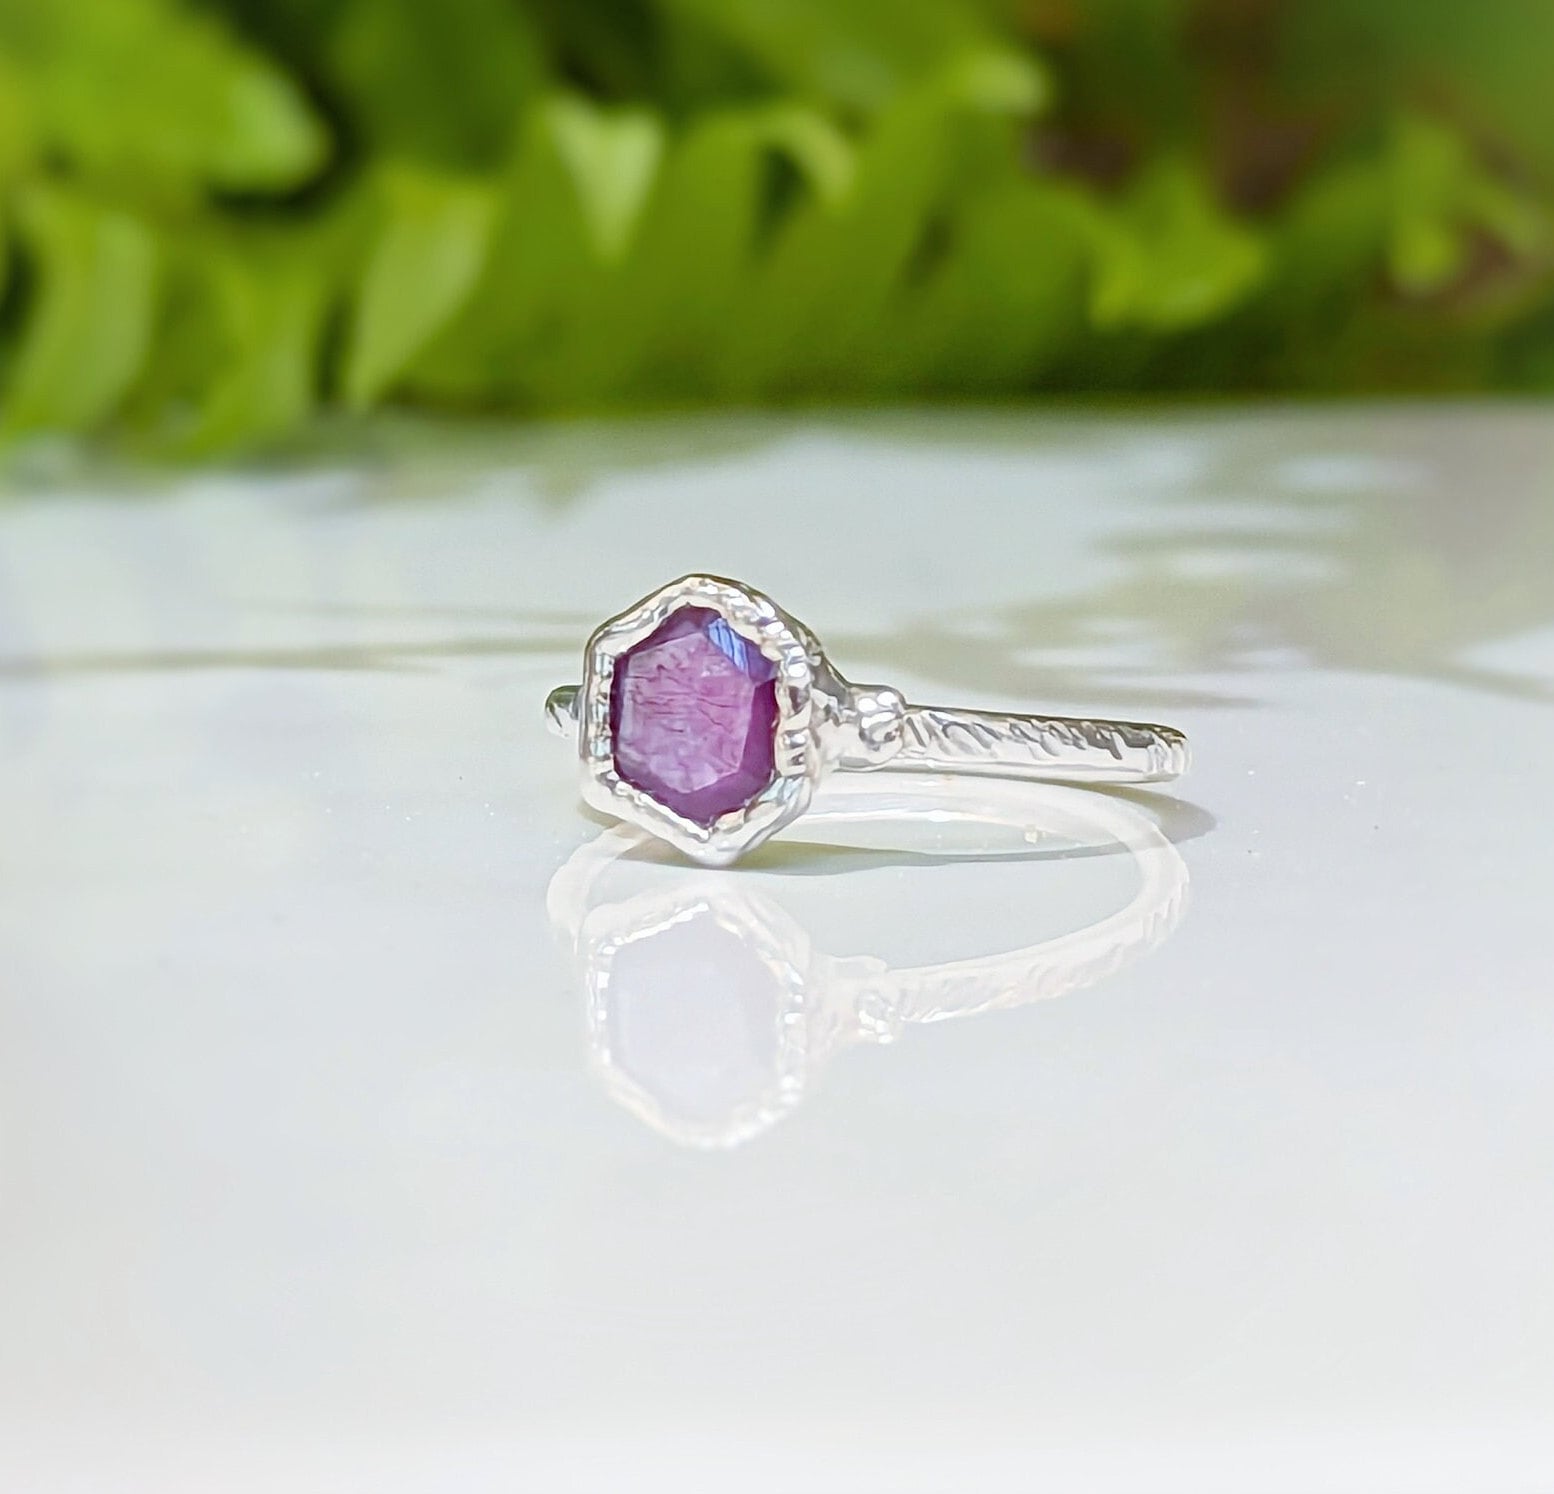 Pink Star Sapphire ring in 18k Gold